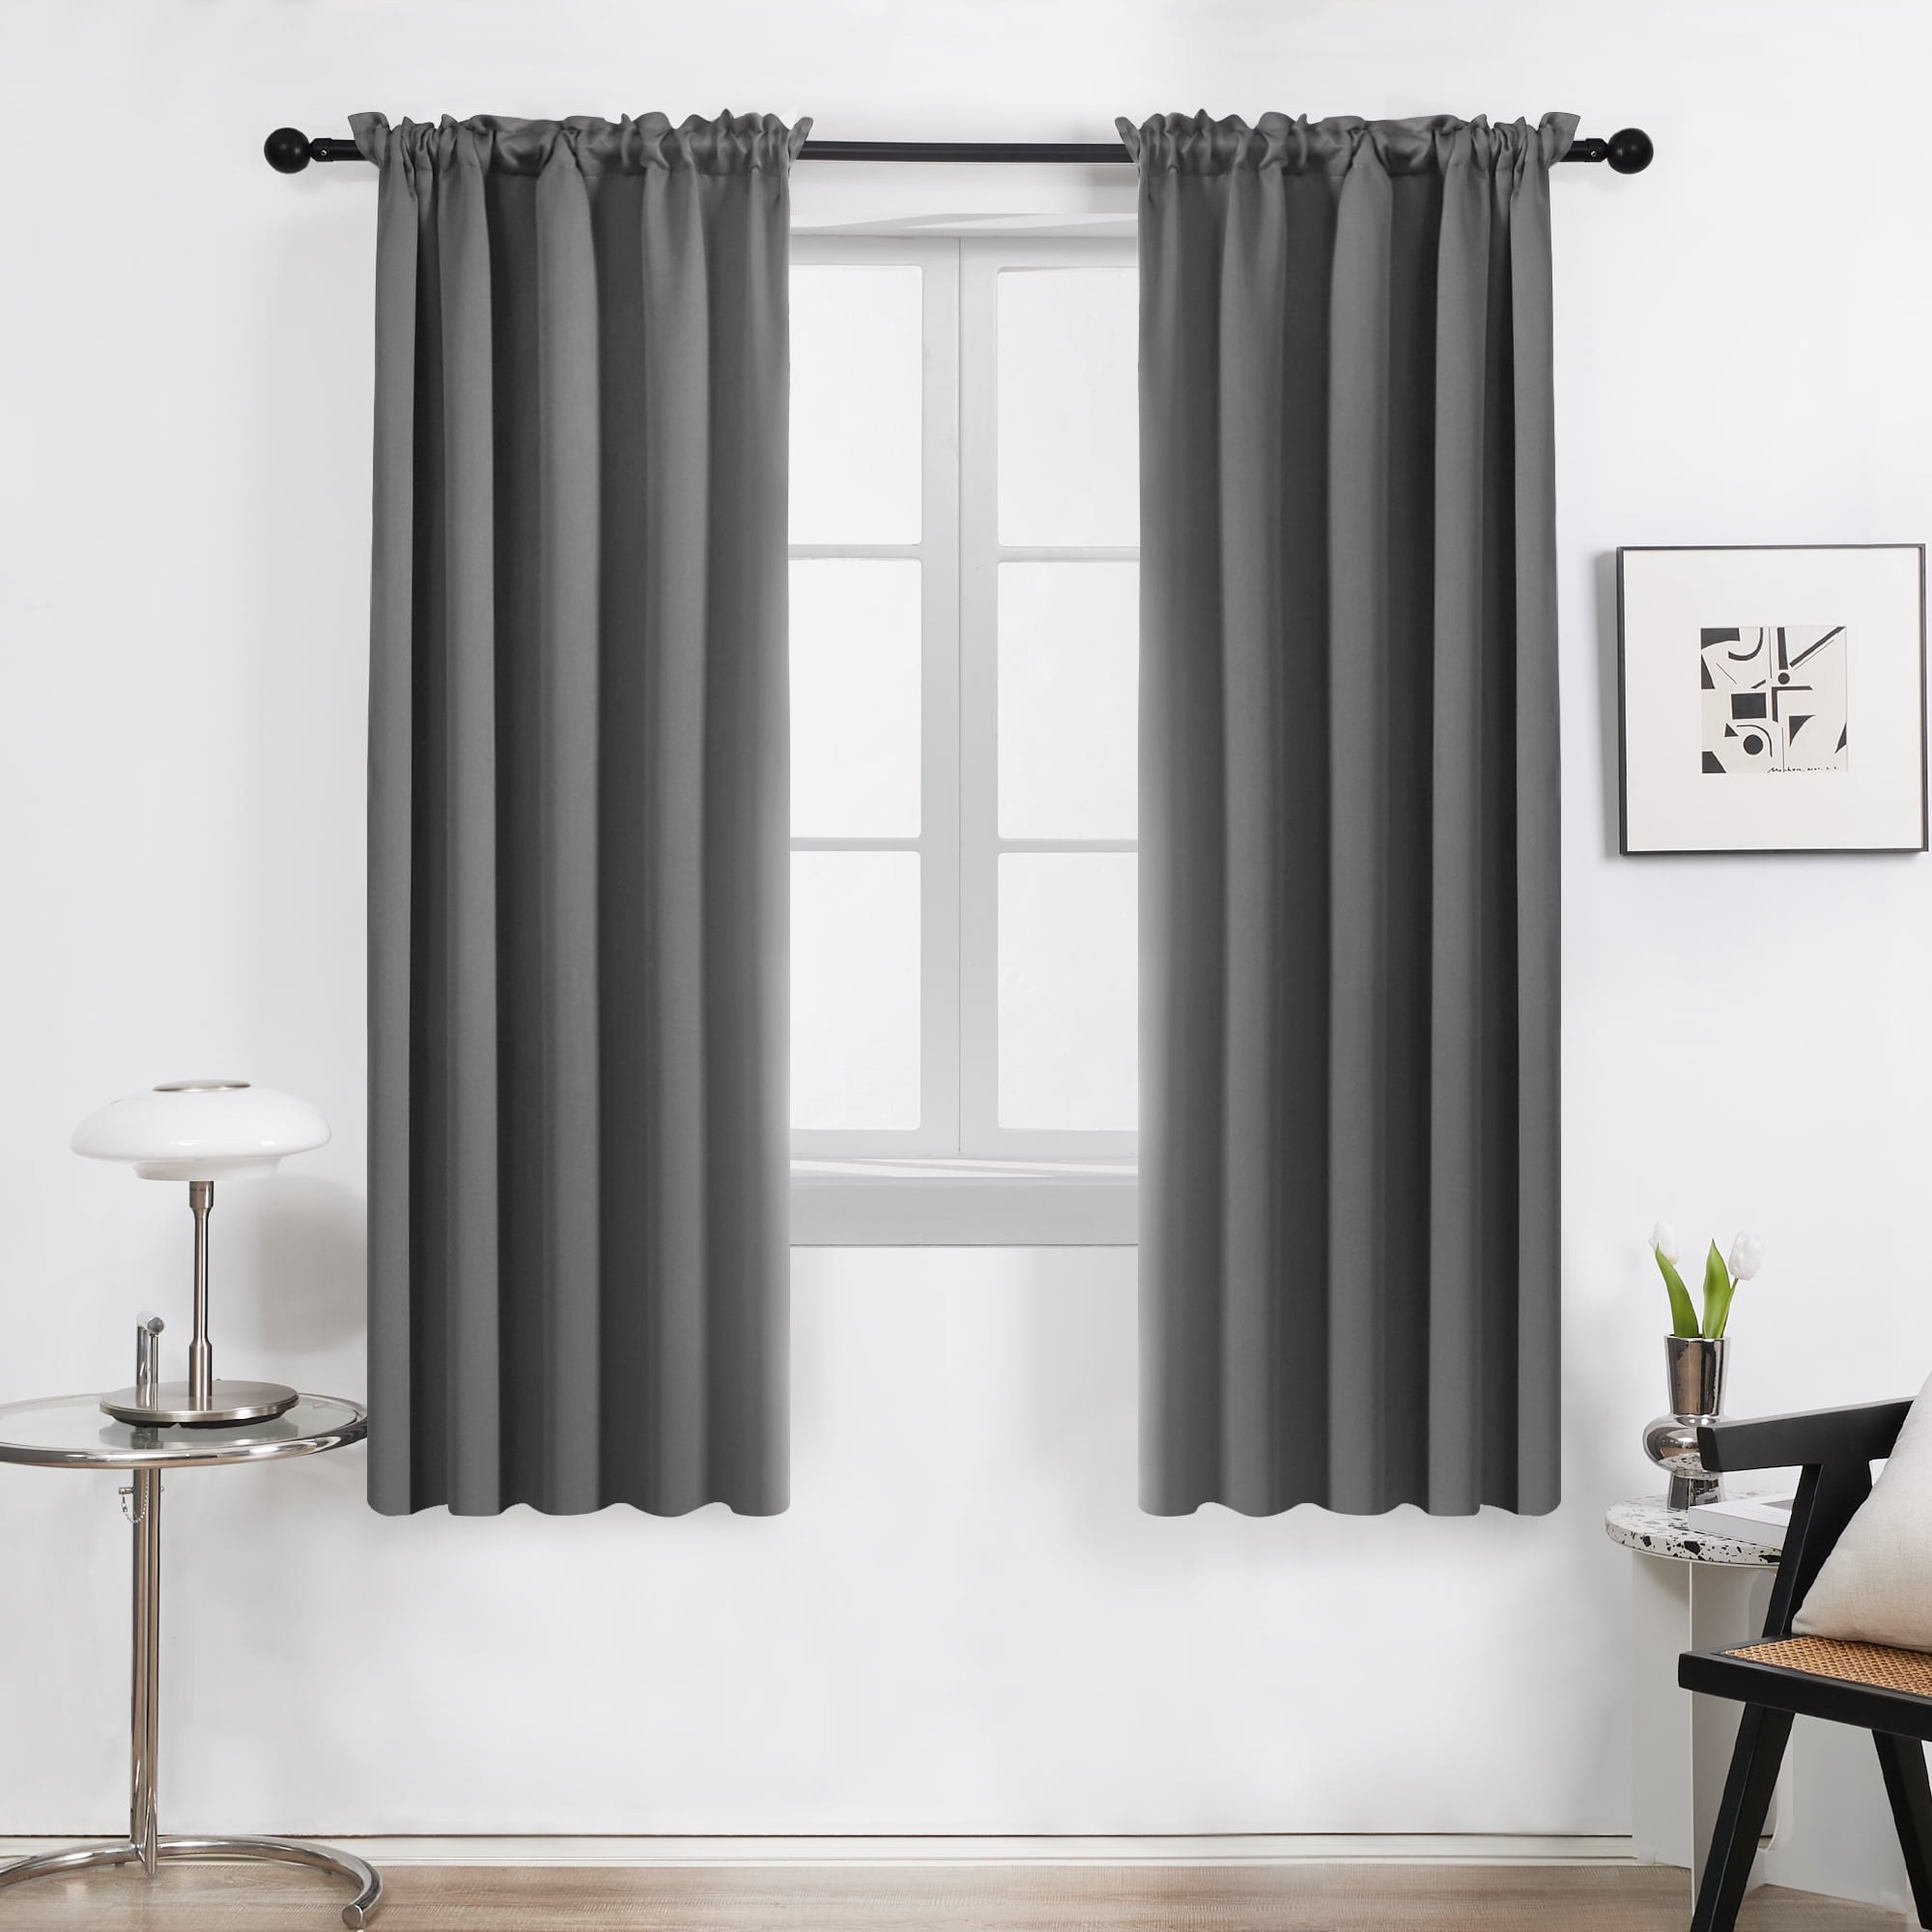 Deconovo Blackout Curtains Thermal Insulated Rod Pocket Small Window  Treatment Panels for Bedroom, Set of 2, 42 x 45 inch, Black